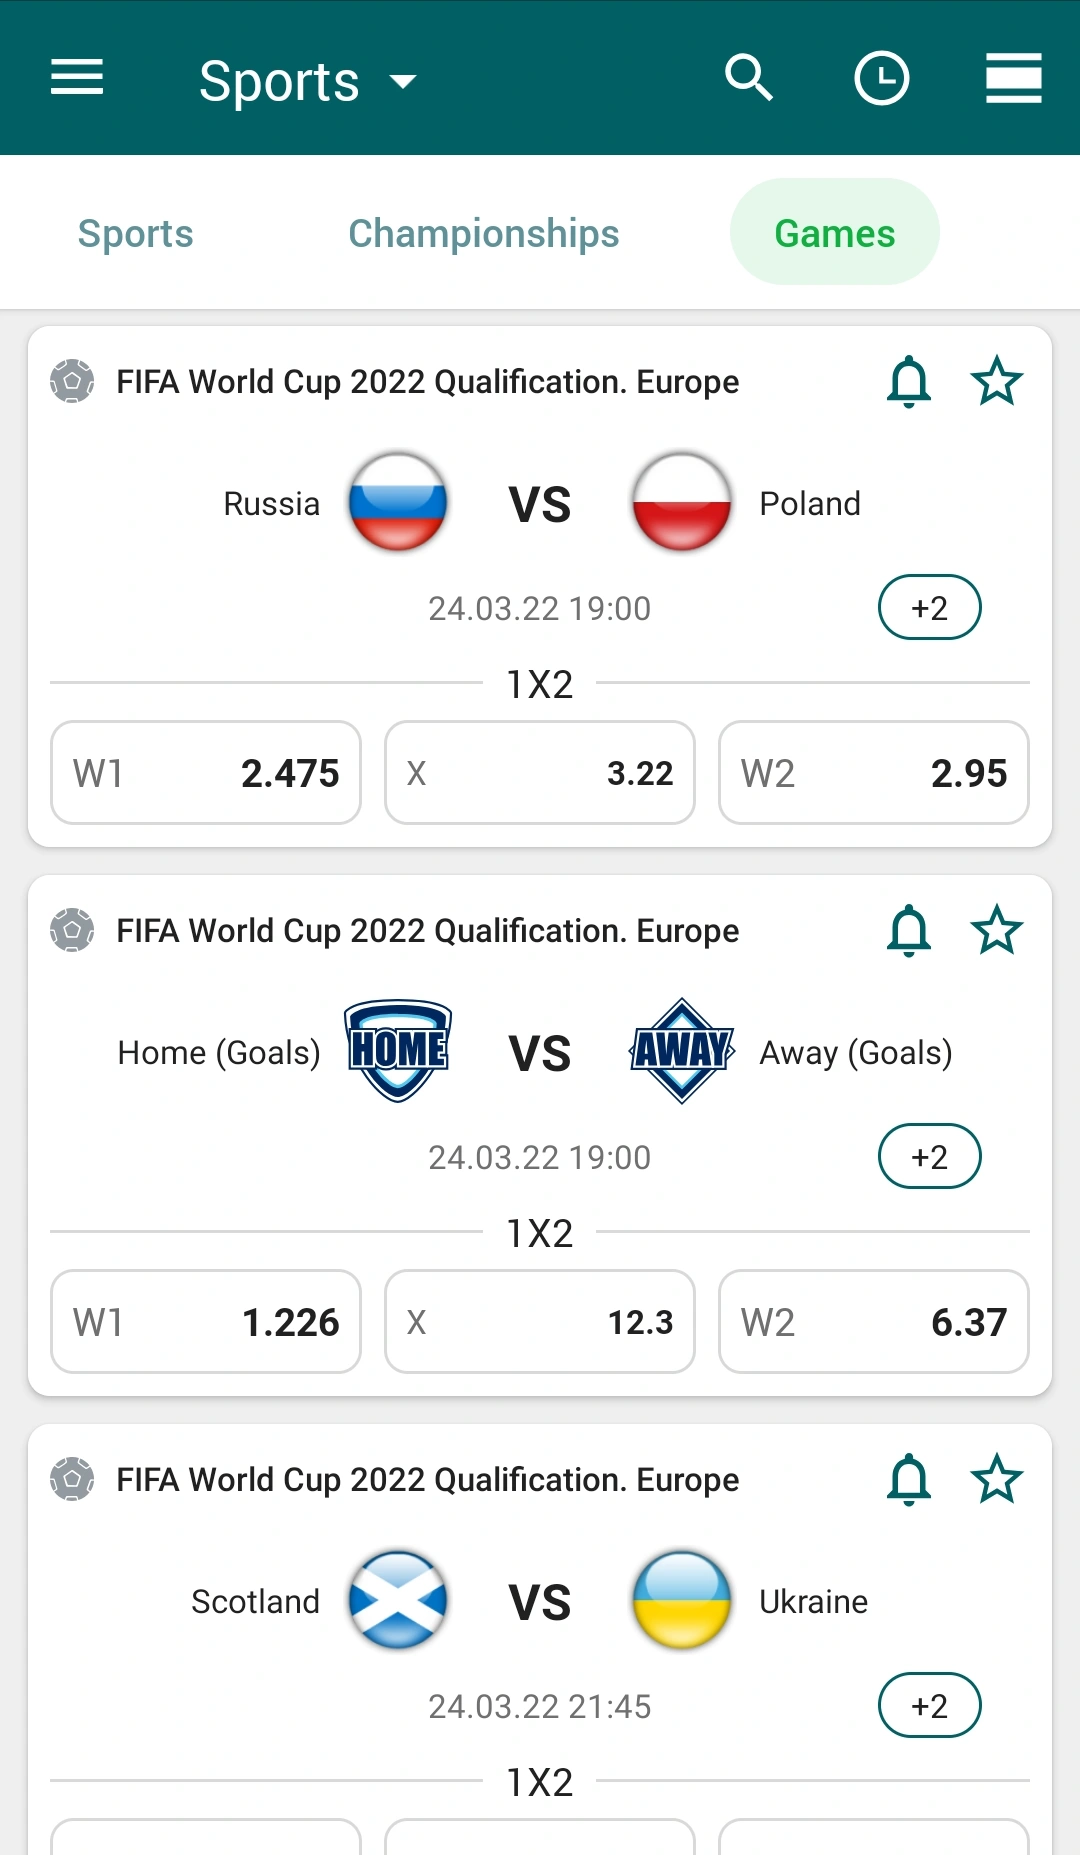 Current matches in the selected section